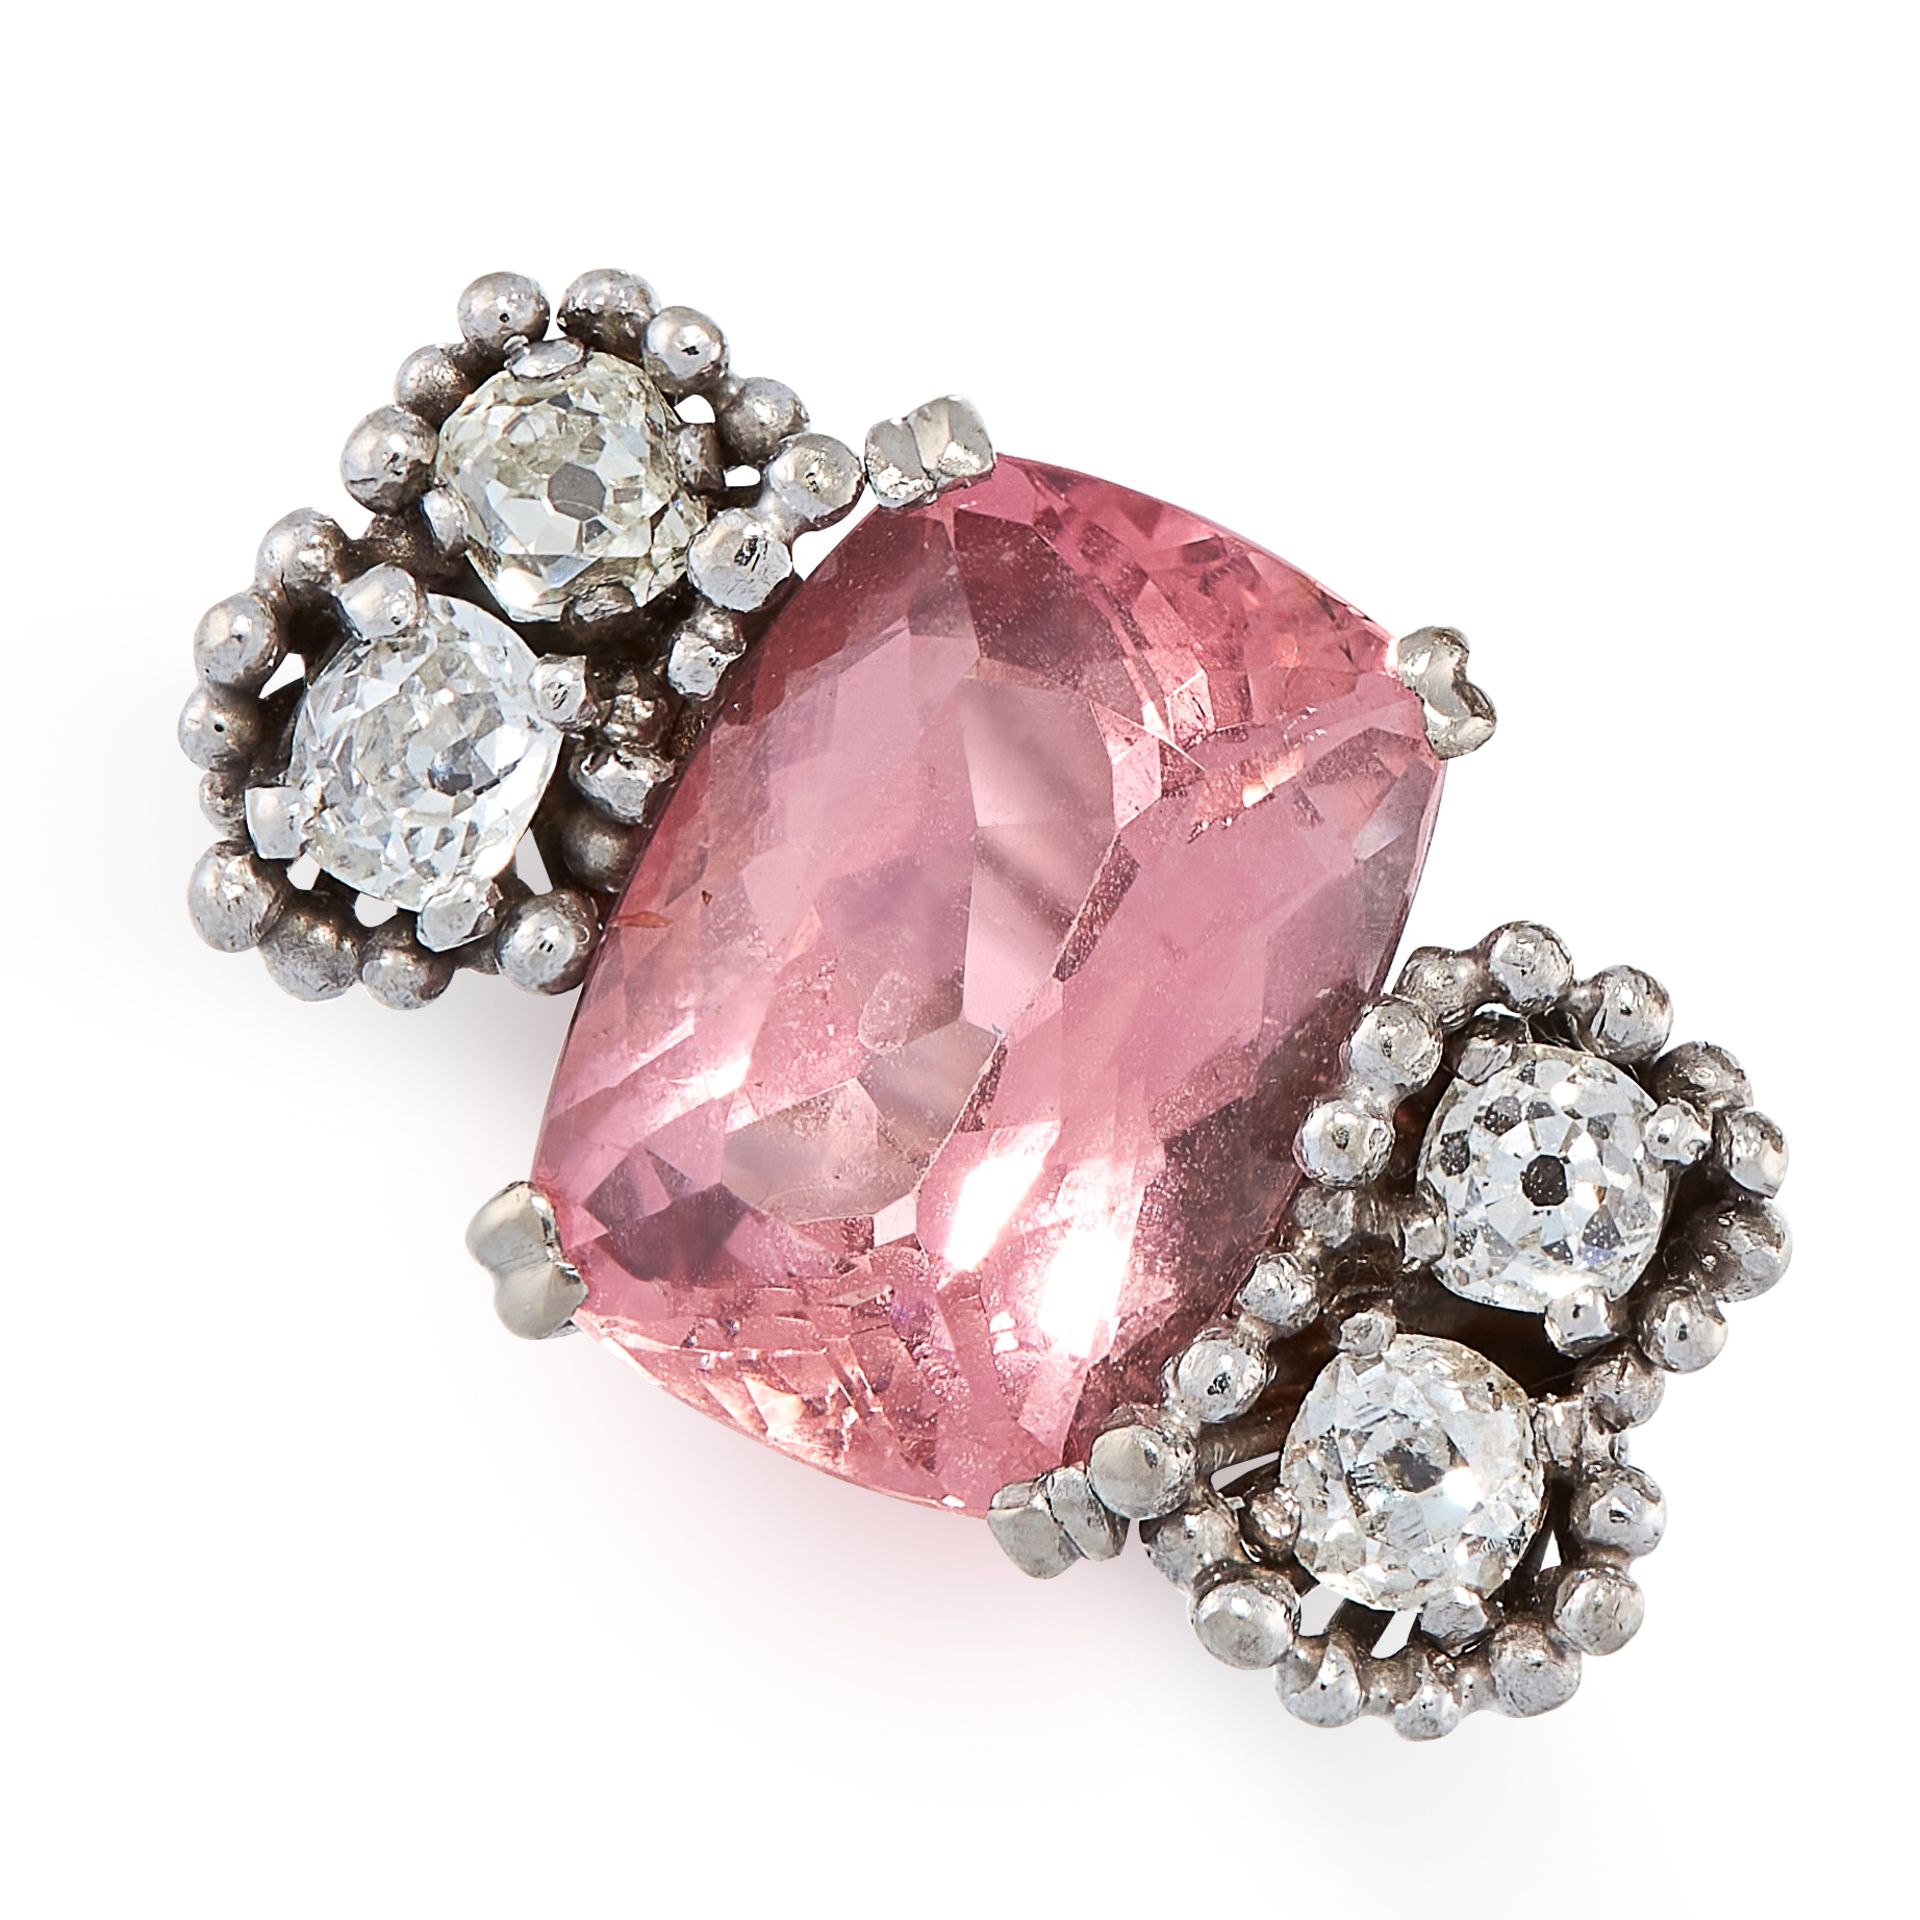 A VINTAGE PINK TOURMALINE AND DIAMOND RING, ANDREW GRIMA 1974 in 18ct white gold, set with a cushion